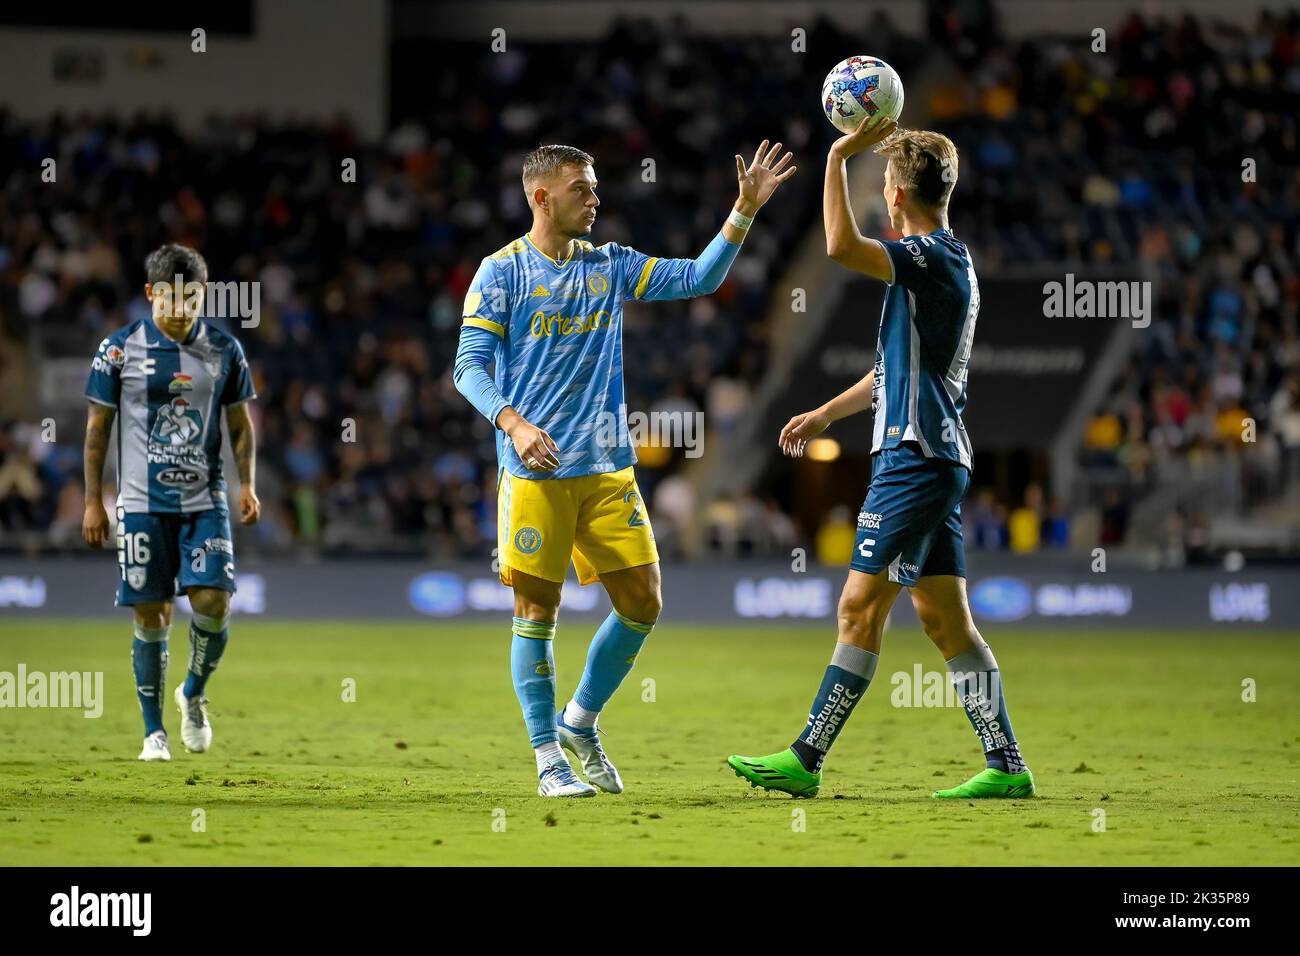 Chester, PA USA. 24th Sep - Philadelphia Union defender takes the ball for a set piece. Photo by Don Mennig - Alamy Live News Stock Photo